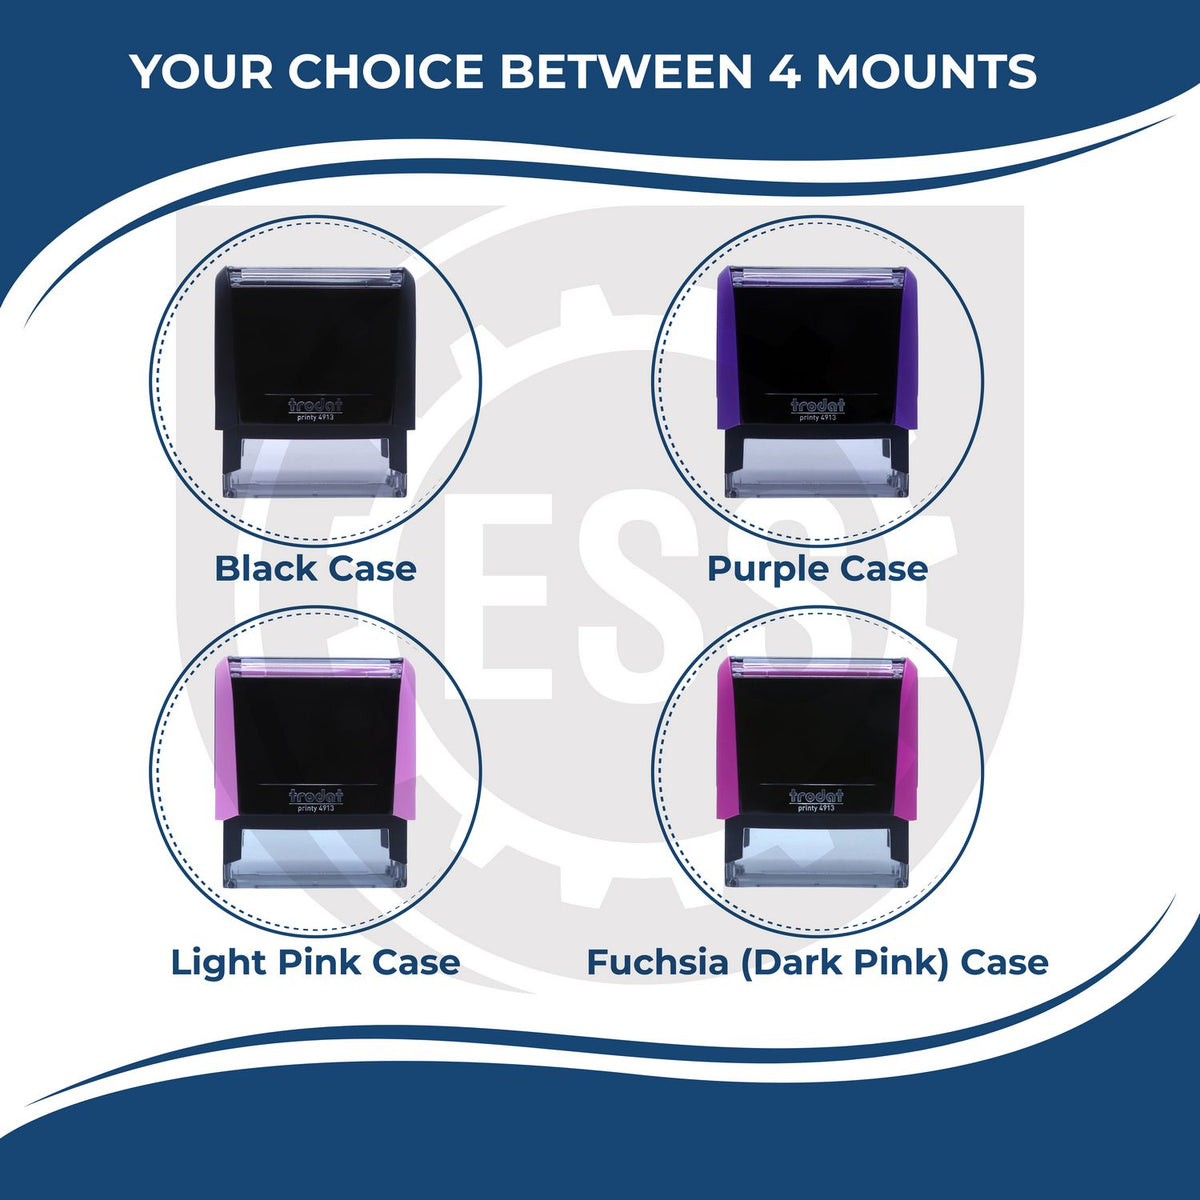 A picture of different colored mounts for the Self-Inking Rectangular Missouri Notary Stamp featurning a Red, Blue or Black Mount